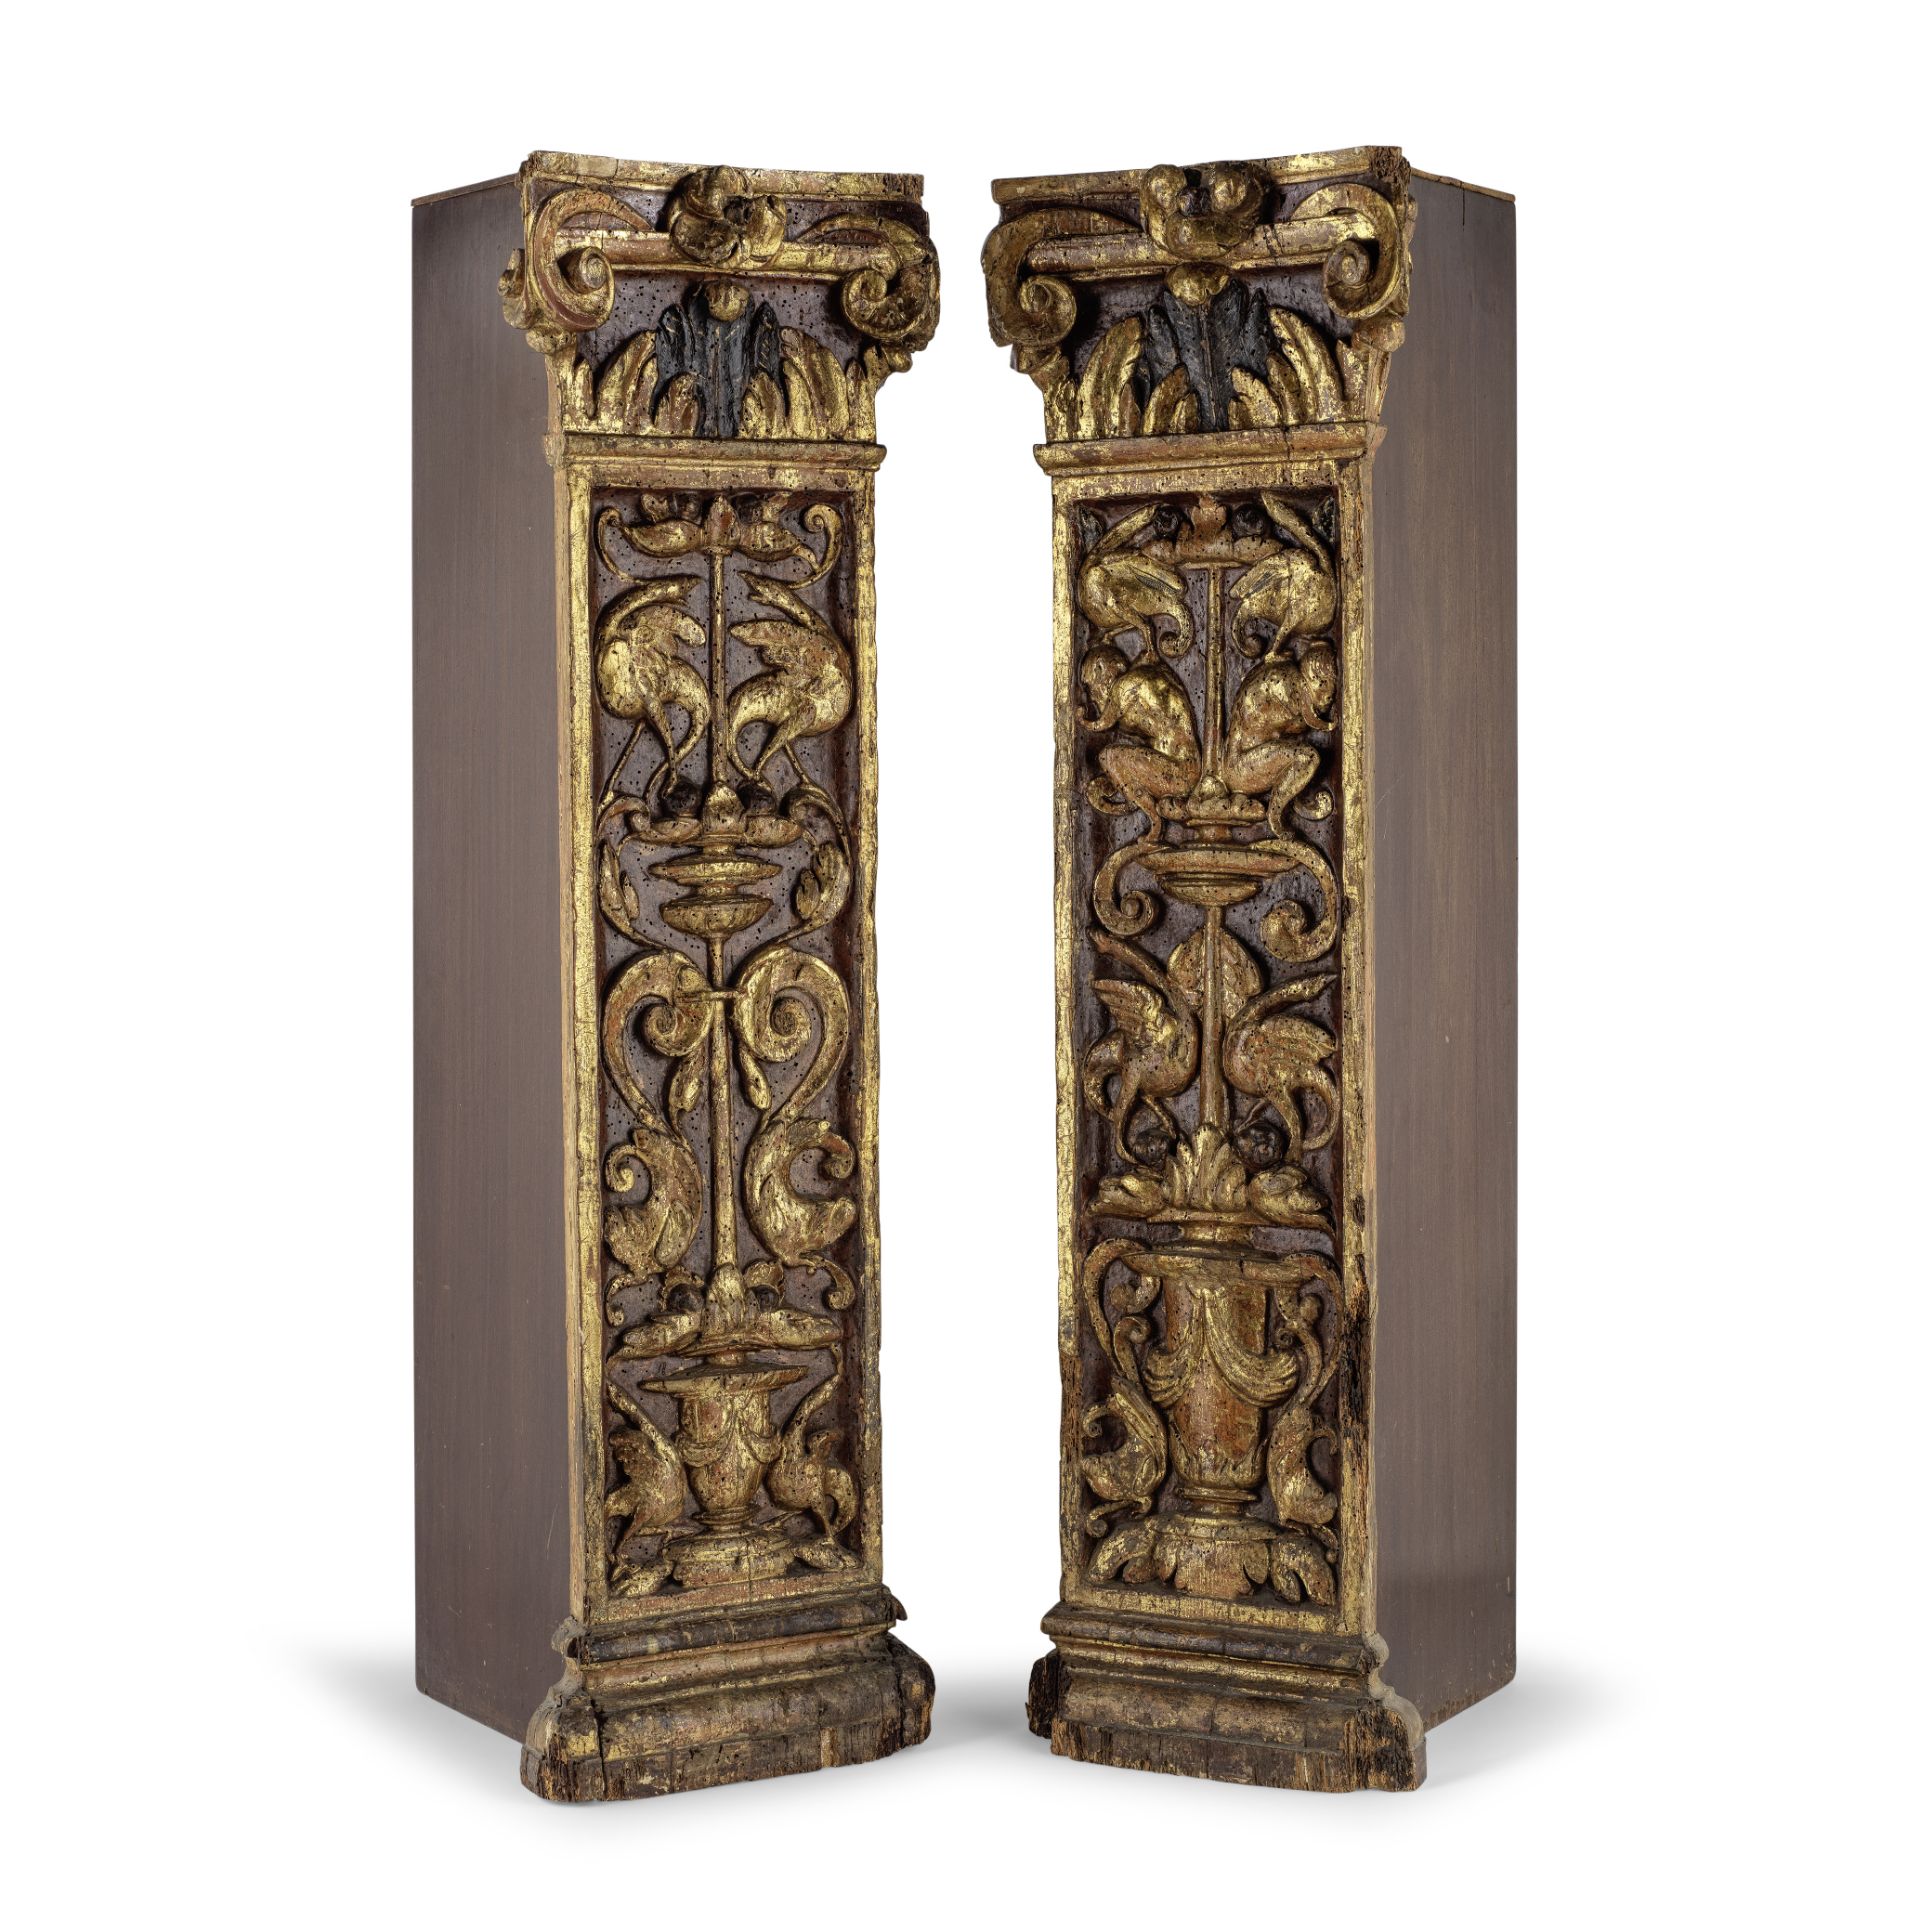 A near pair of 18th century and later Italian carved and gilt gesso pedestals in the Baroque sty...